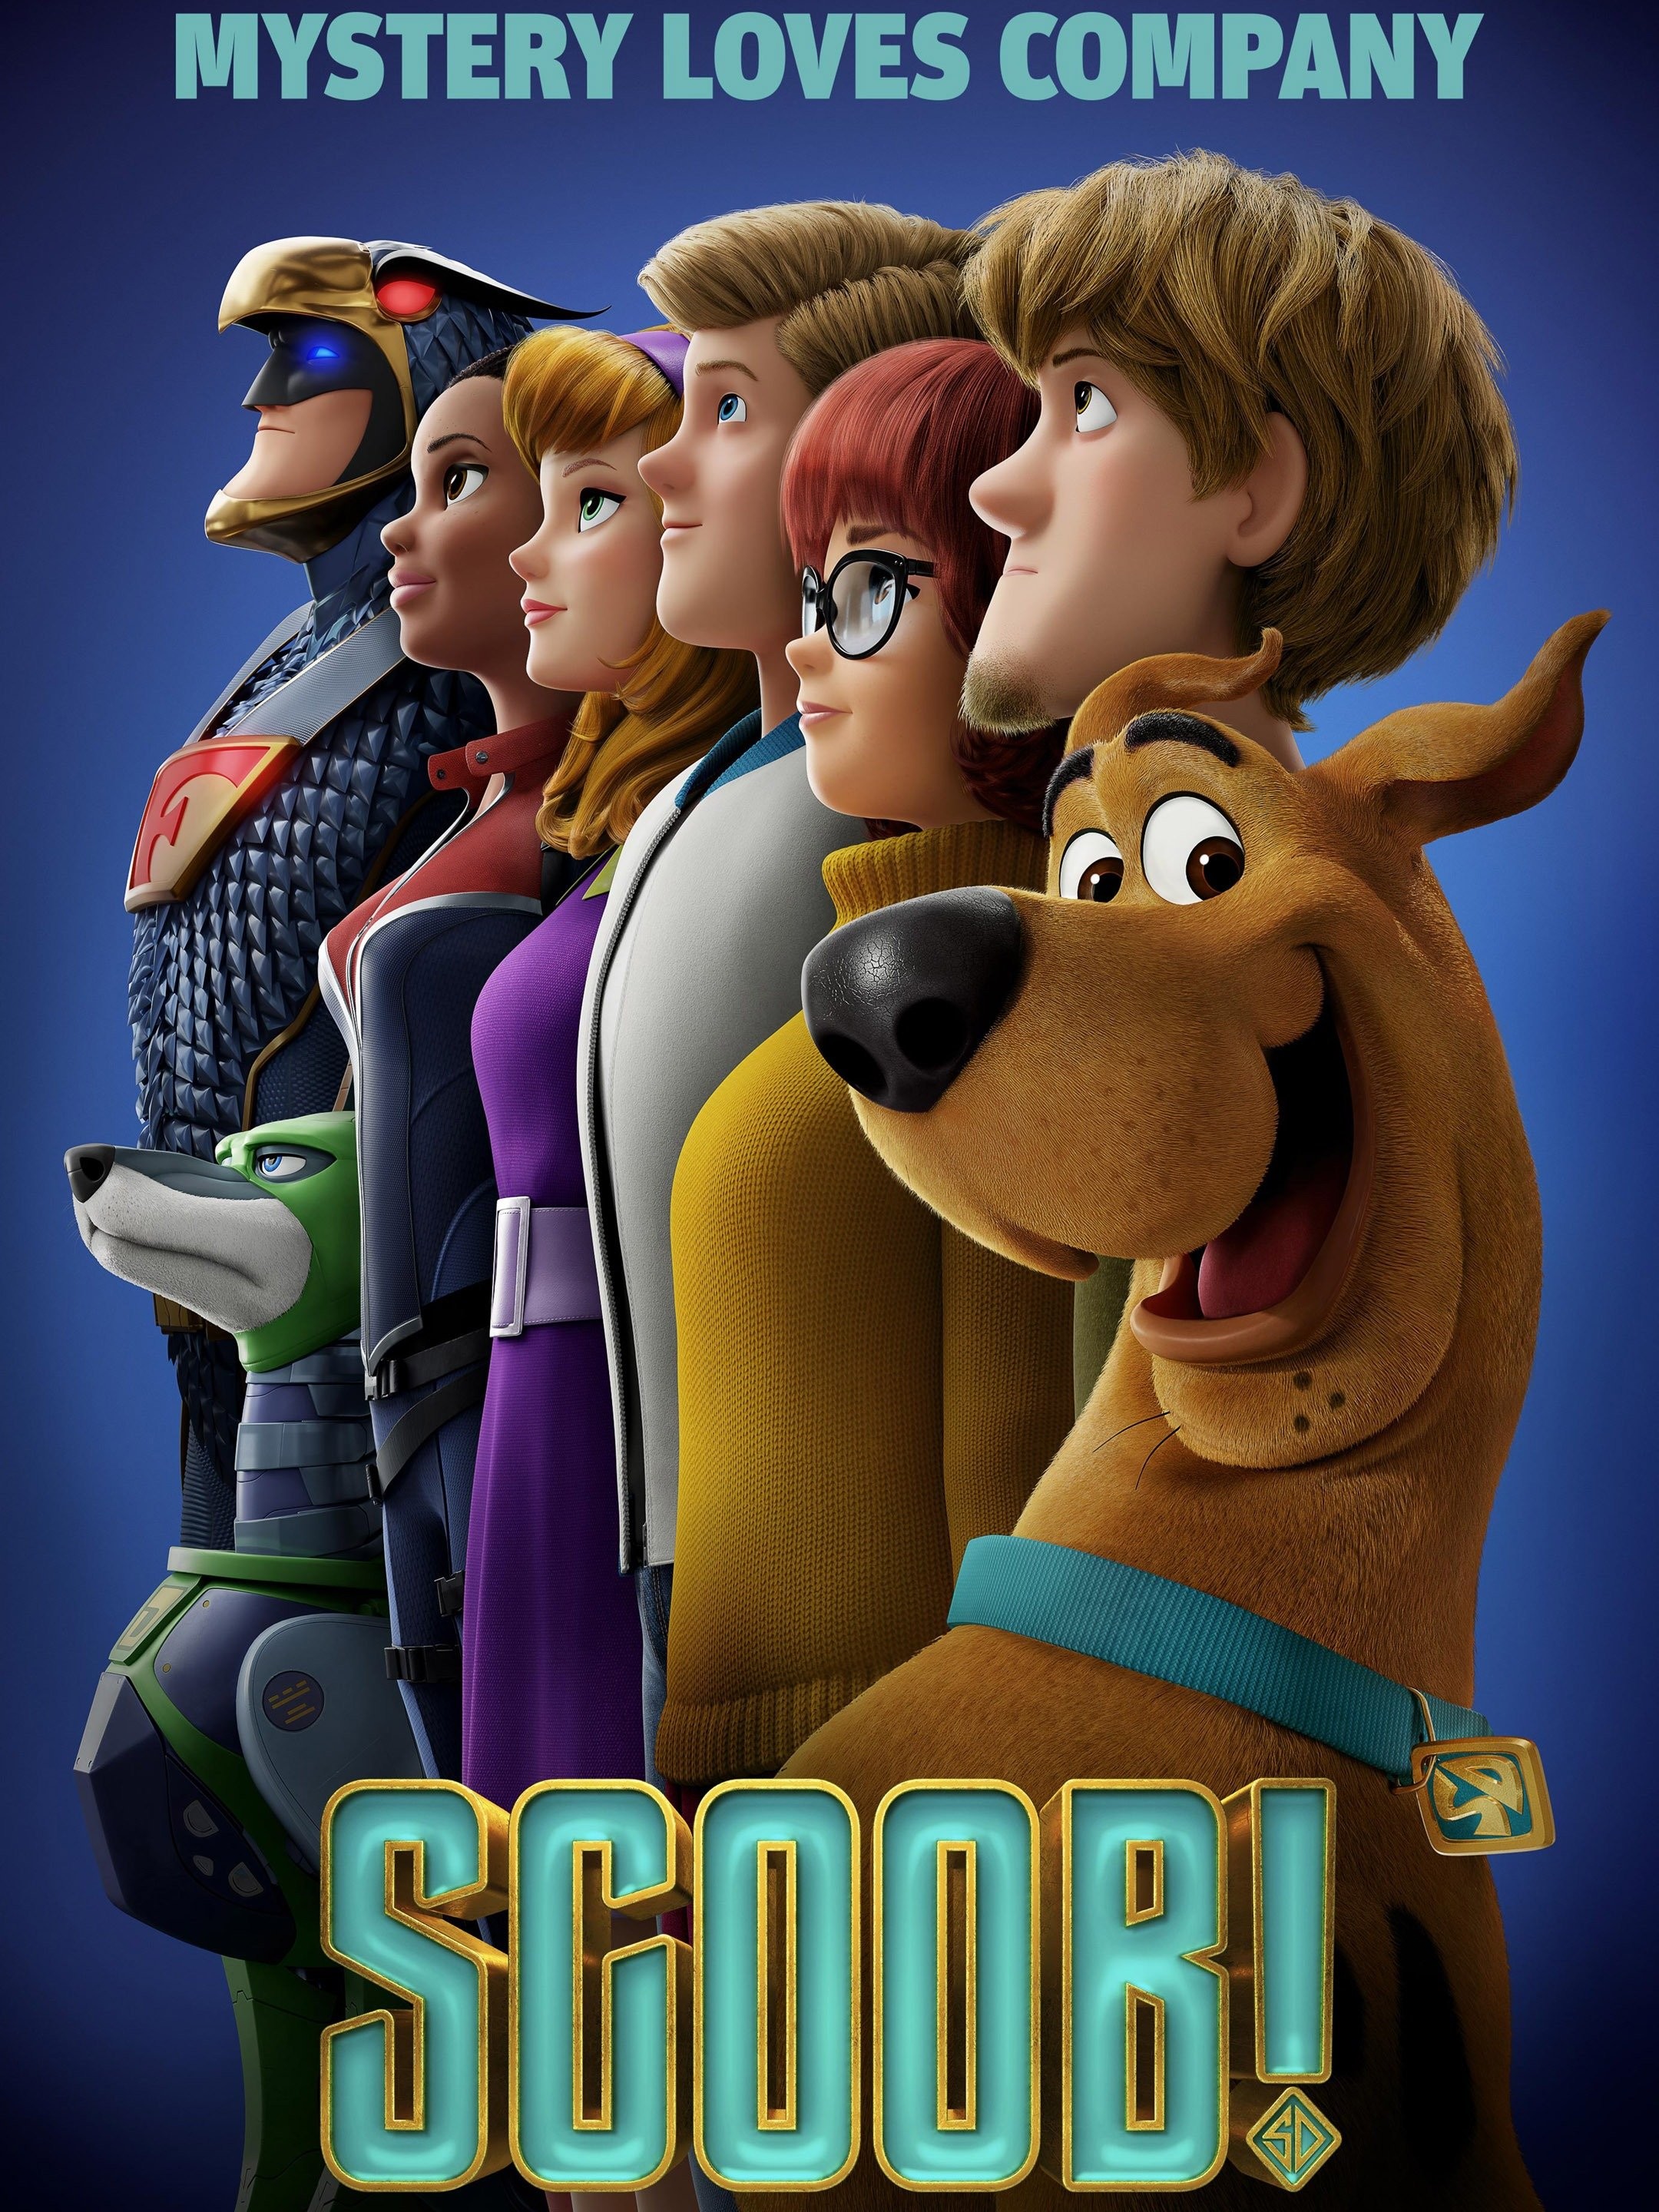 HBO's new Scooby Doo show has just 6% from fans on Rotten Tomatoes